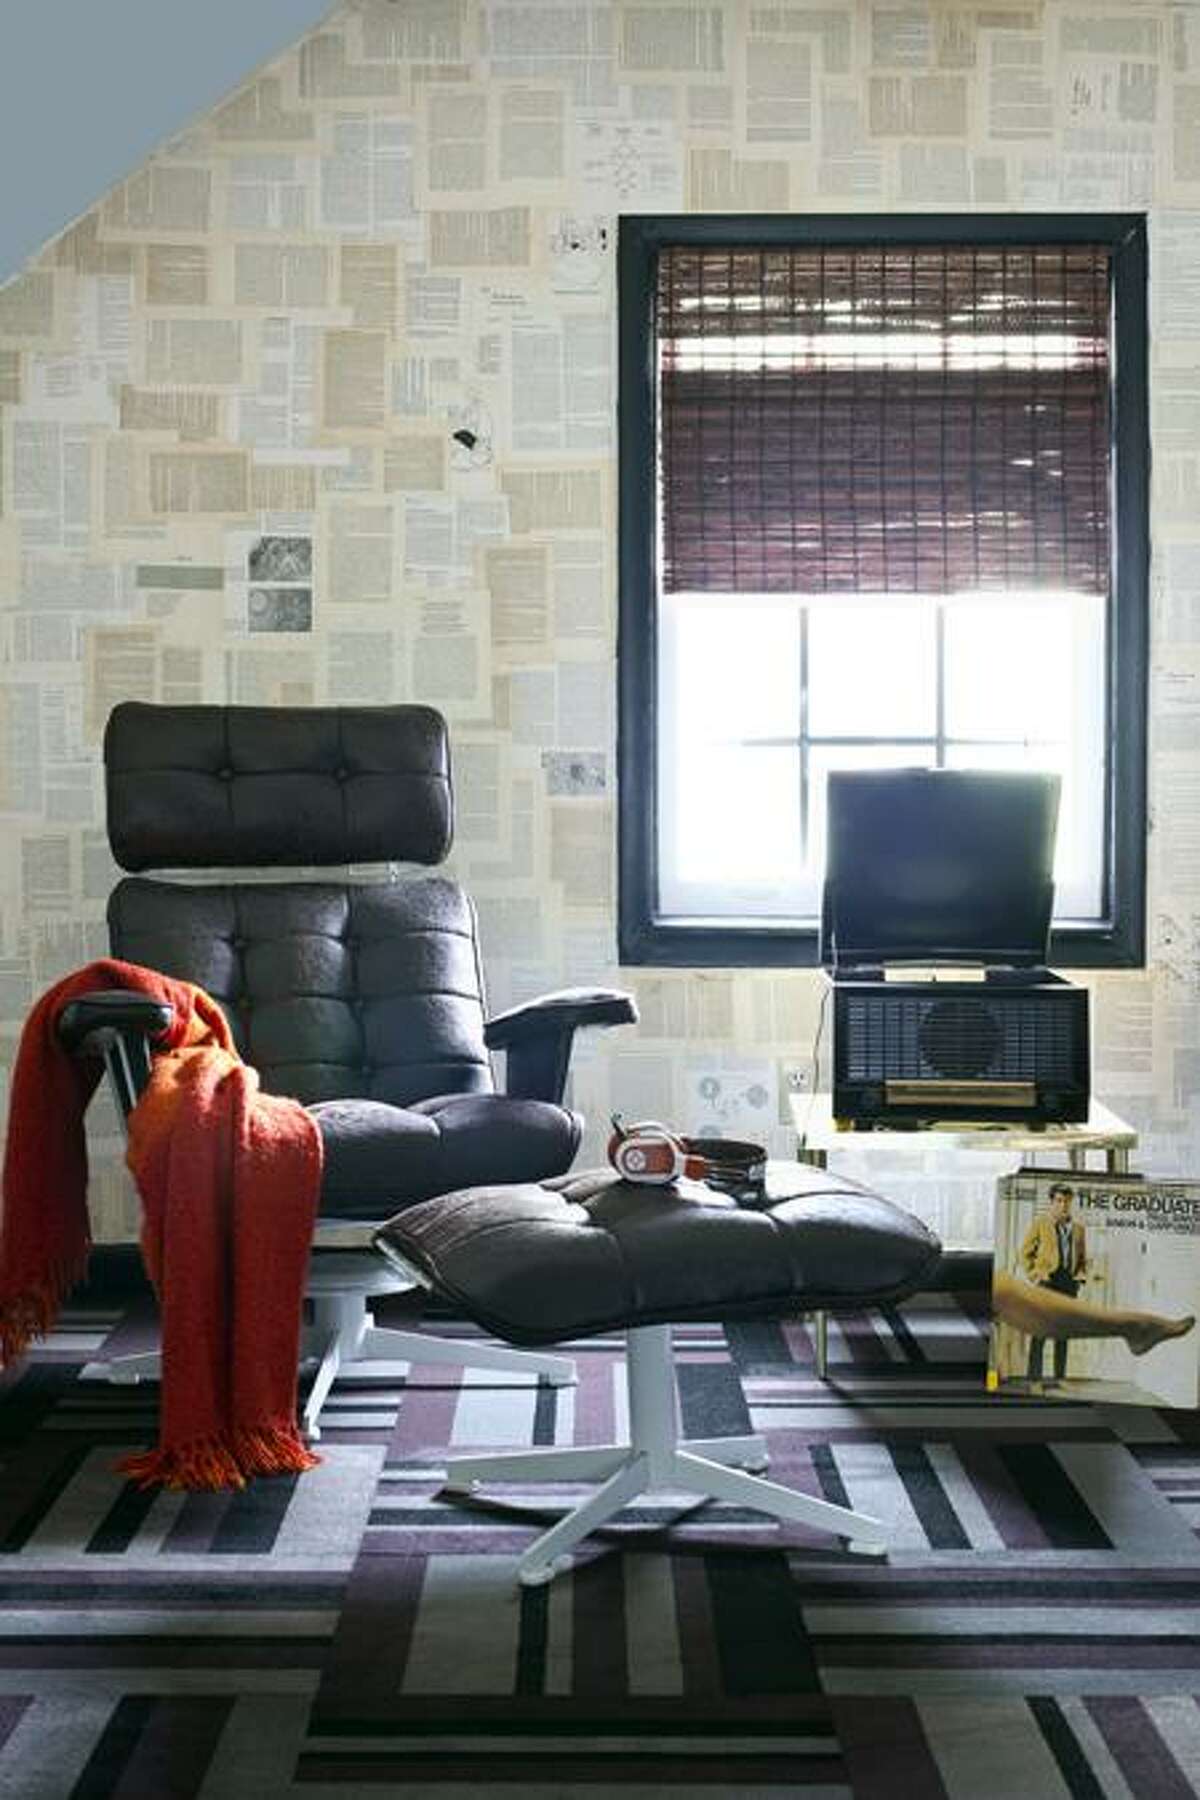 This undated photo courtesy of Christina Wedge shows a room designed bv Brian Patrick Flynn/Houzz.com. Even if you're not a student right now, you can create a space for reading or pursuing a hobby. Any quiet alcove or area will do, says Flynn, founder and editor of decordemon.com. Flynn covered the walls in this reading nook with pages from vintage books. (AP Photo/Christina Wedge)